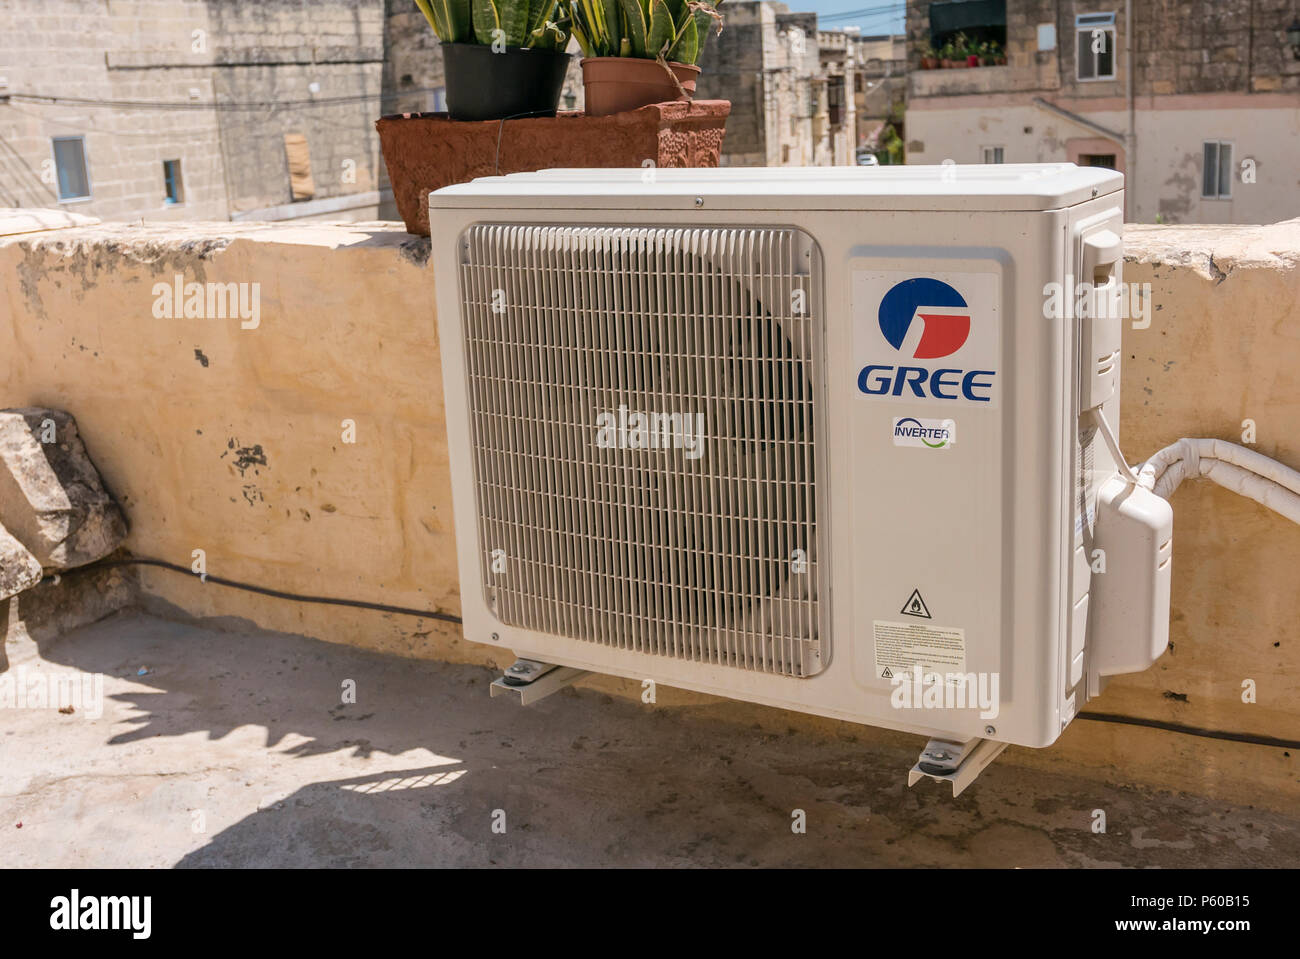 External heat exchanger unit of an air conditioning system made by Gree. Stock Photo